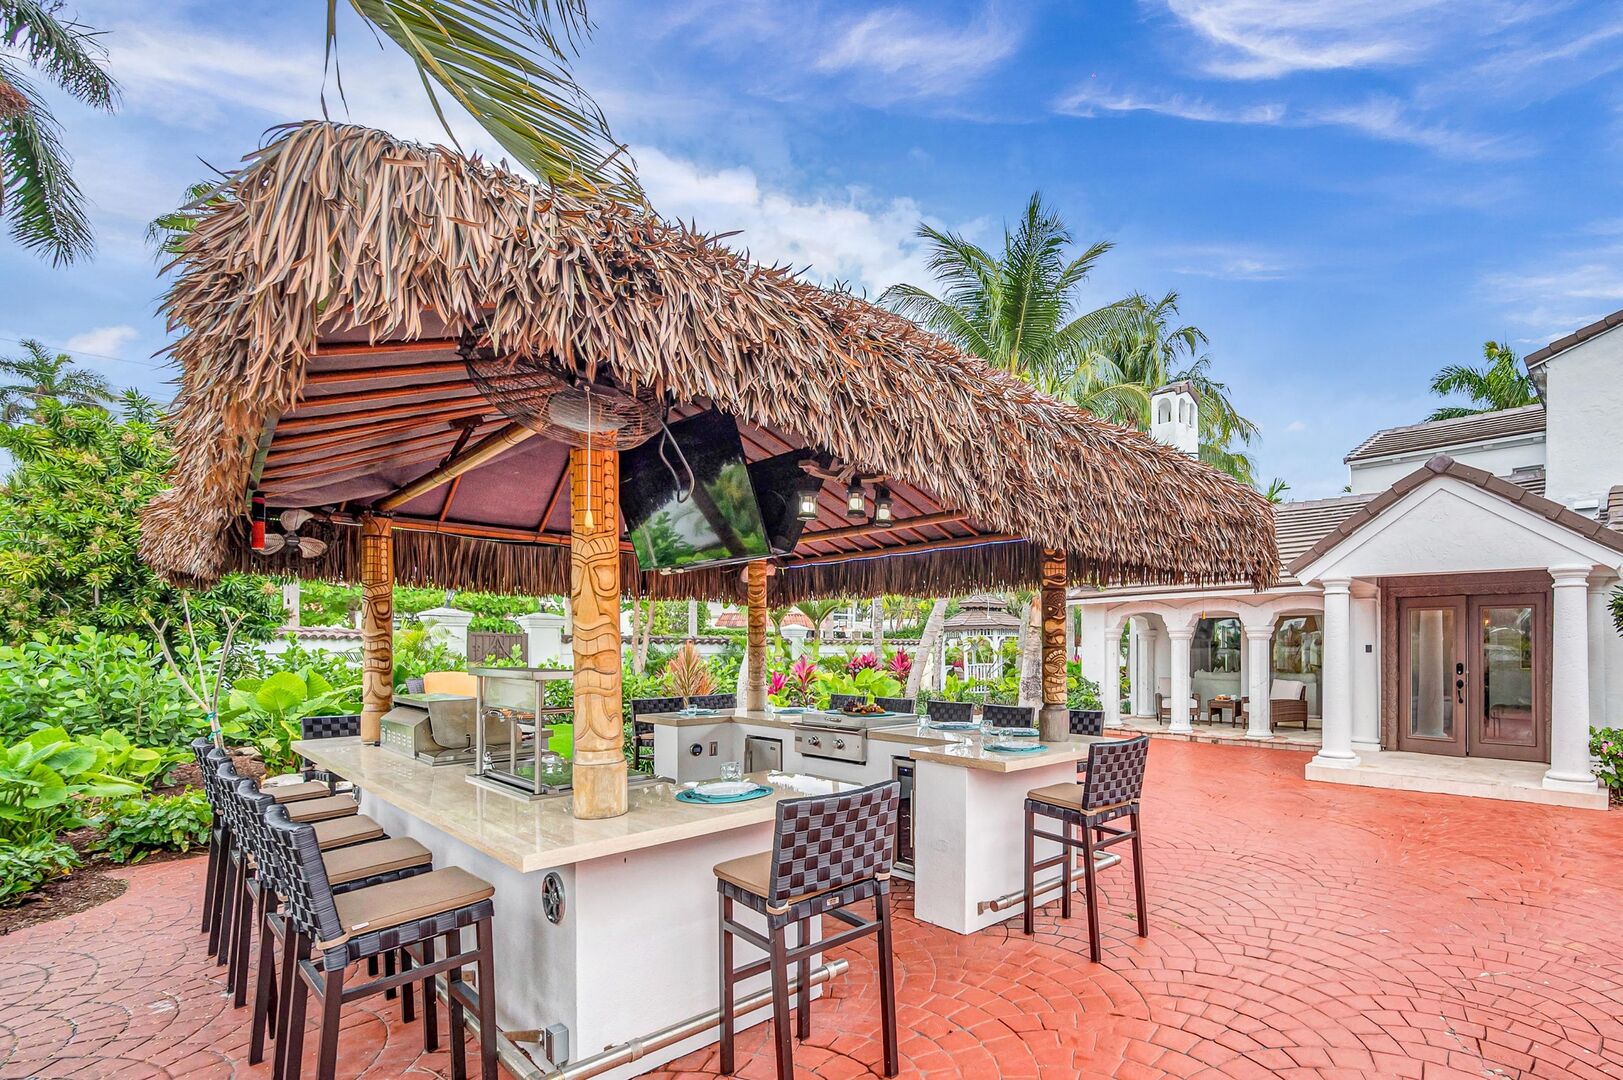 The tiki outdoor kitchen with wrapped around bar seating features two TVs and a bbq.